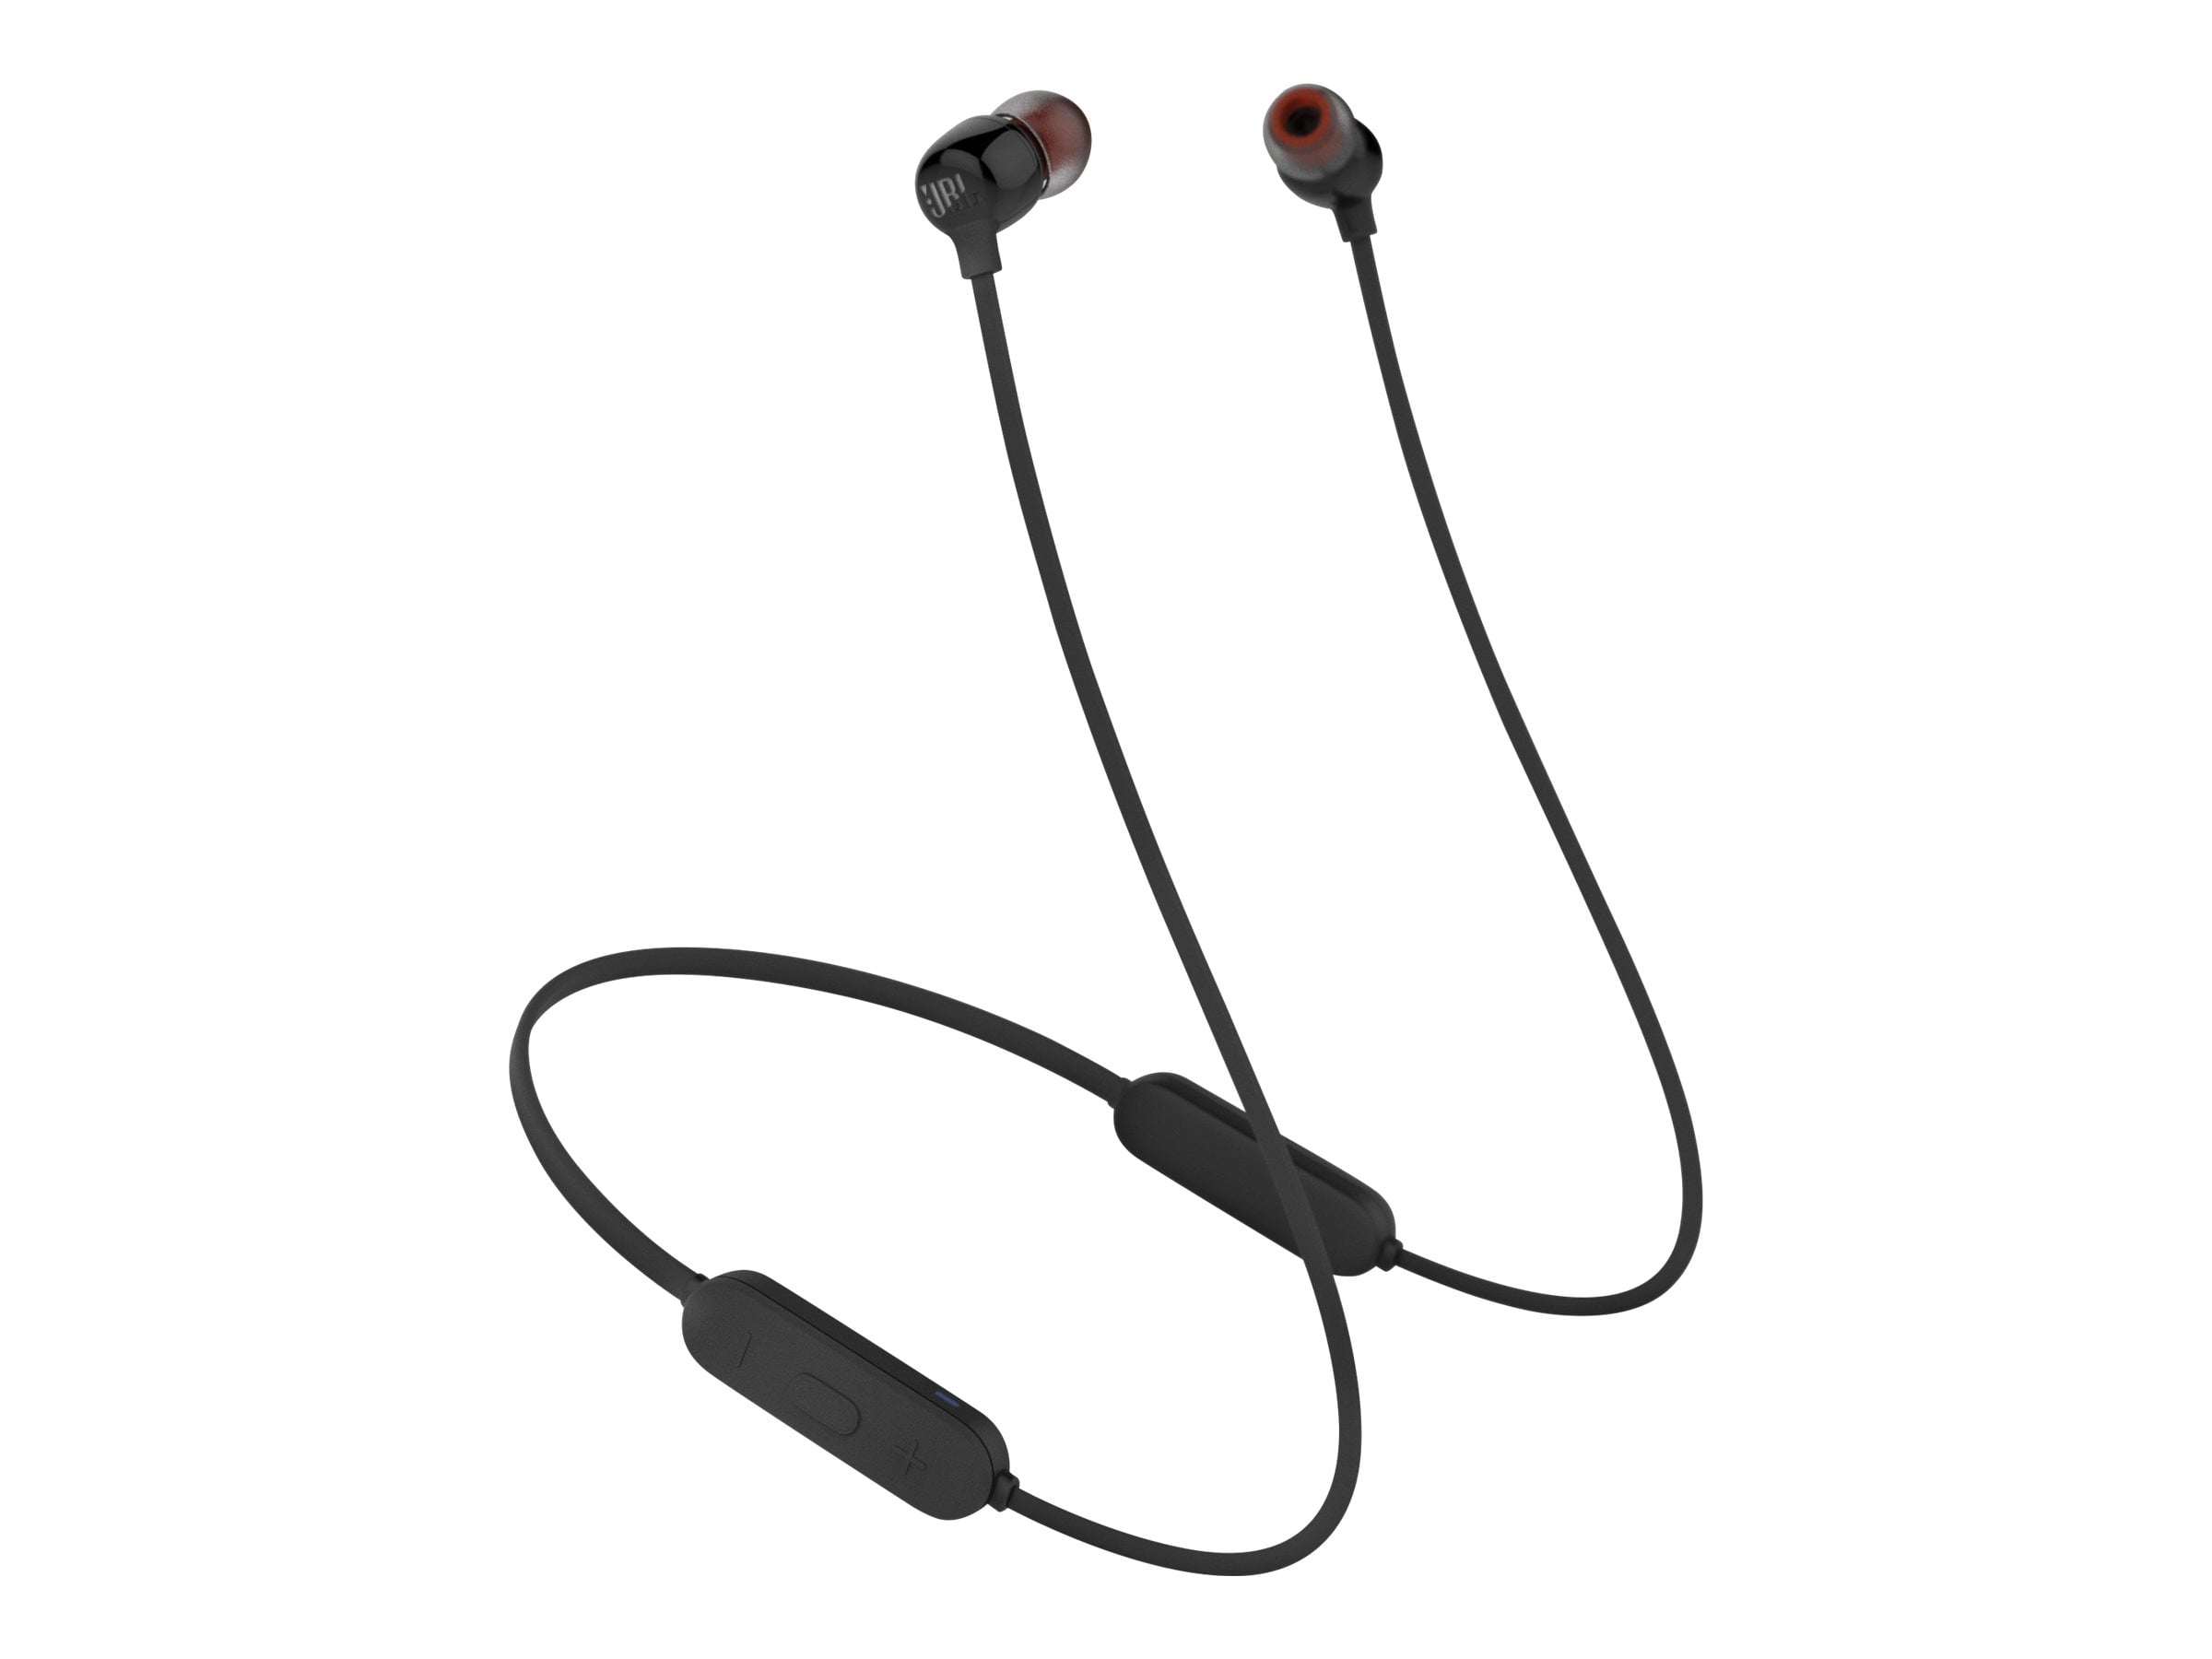 JBL TUNE125BT - Lifestyle Headphones - Wireless In-ear with 3-button mic/remote, flat cable - Walmart.com